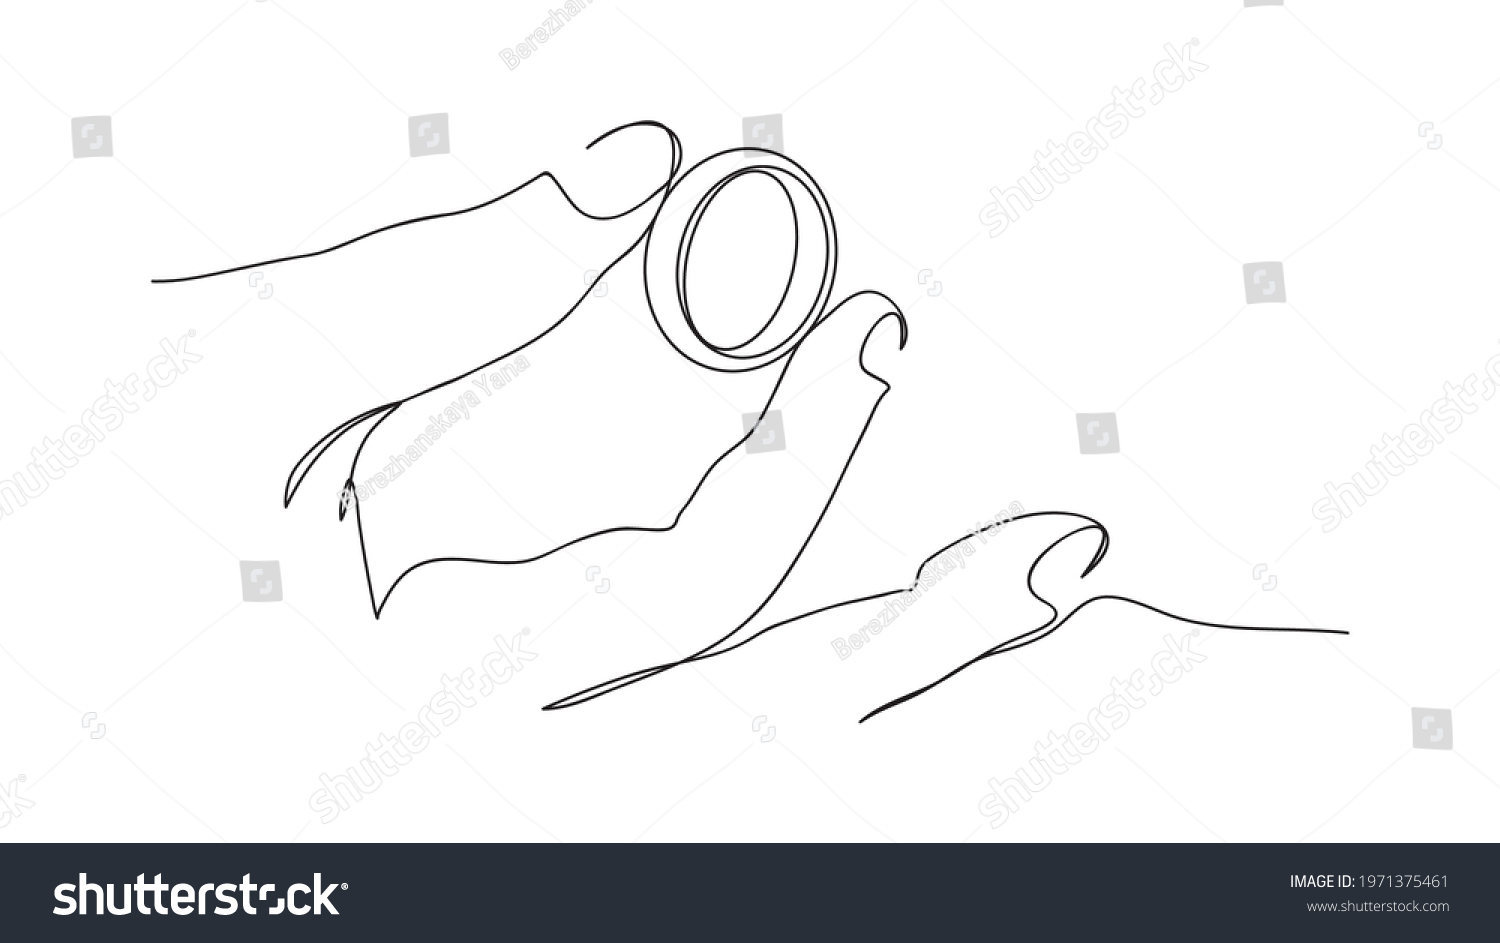 SVG of One continuous drawn line love marriage marriage symbol drawn by hand picture silhouette. line art. ring exchange ritual svg